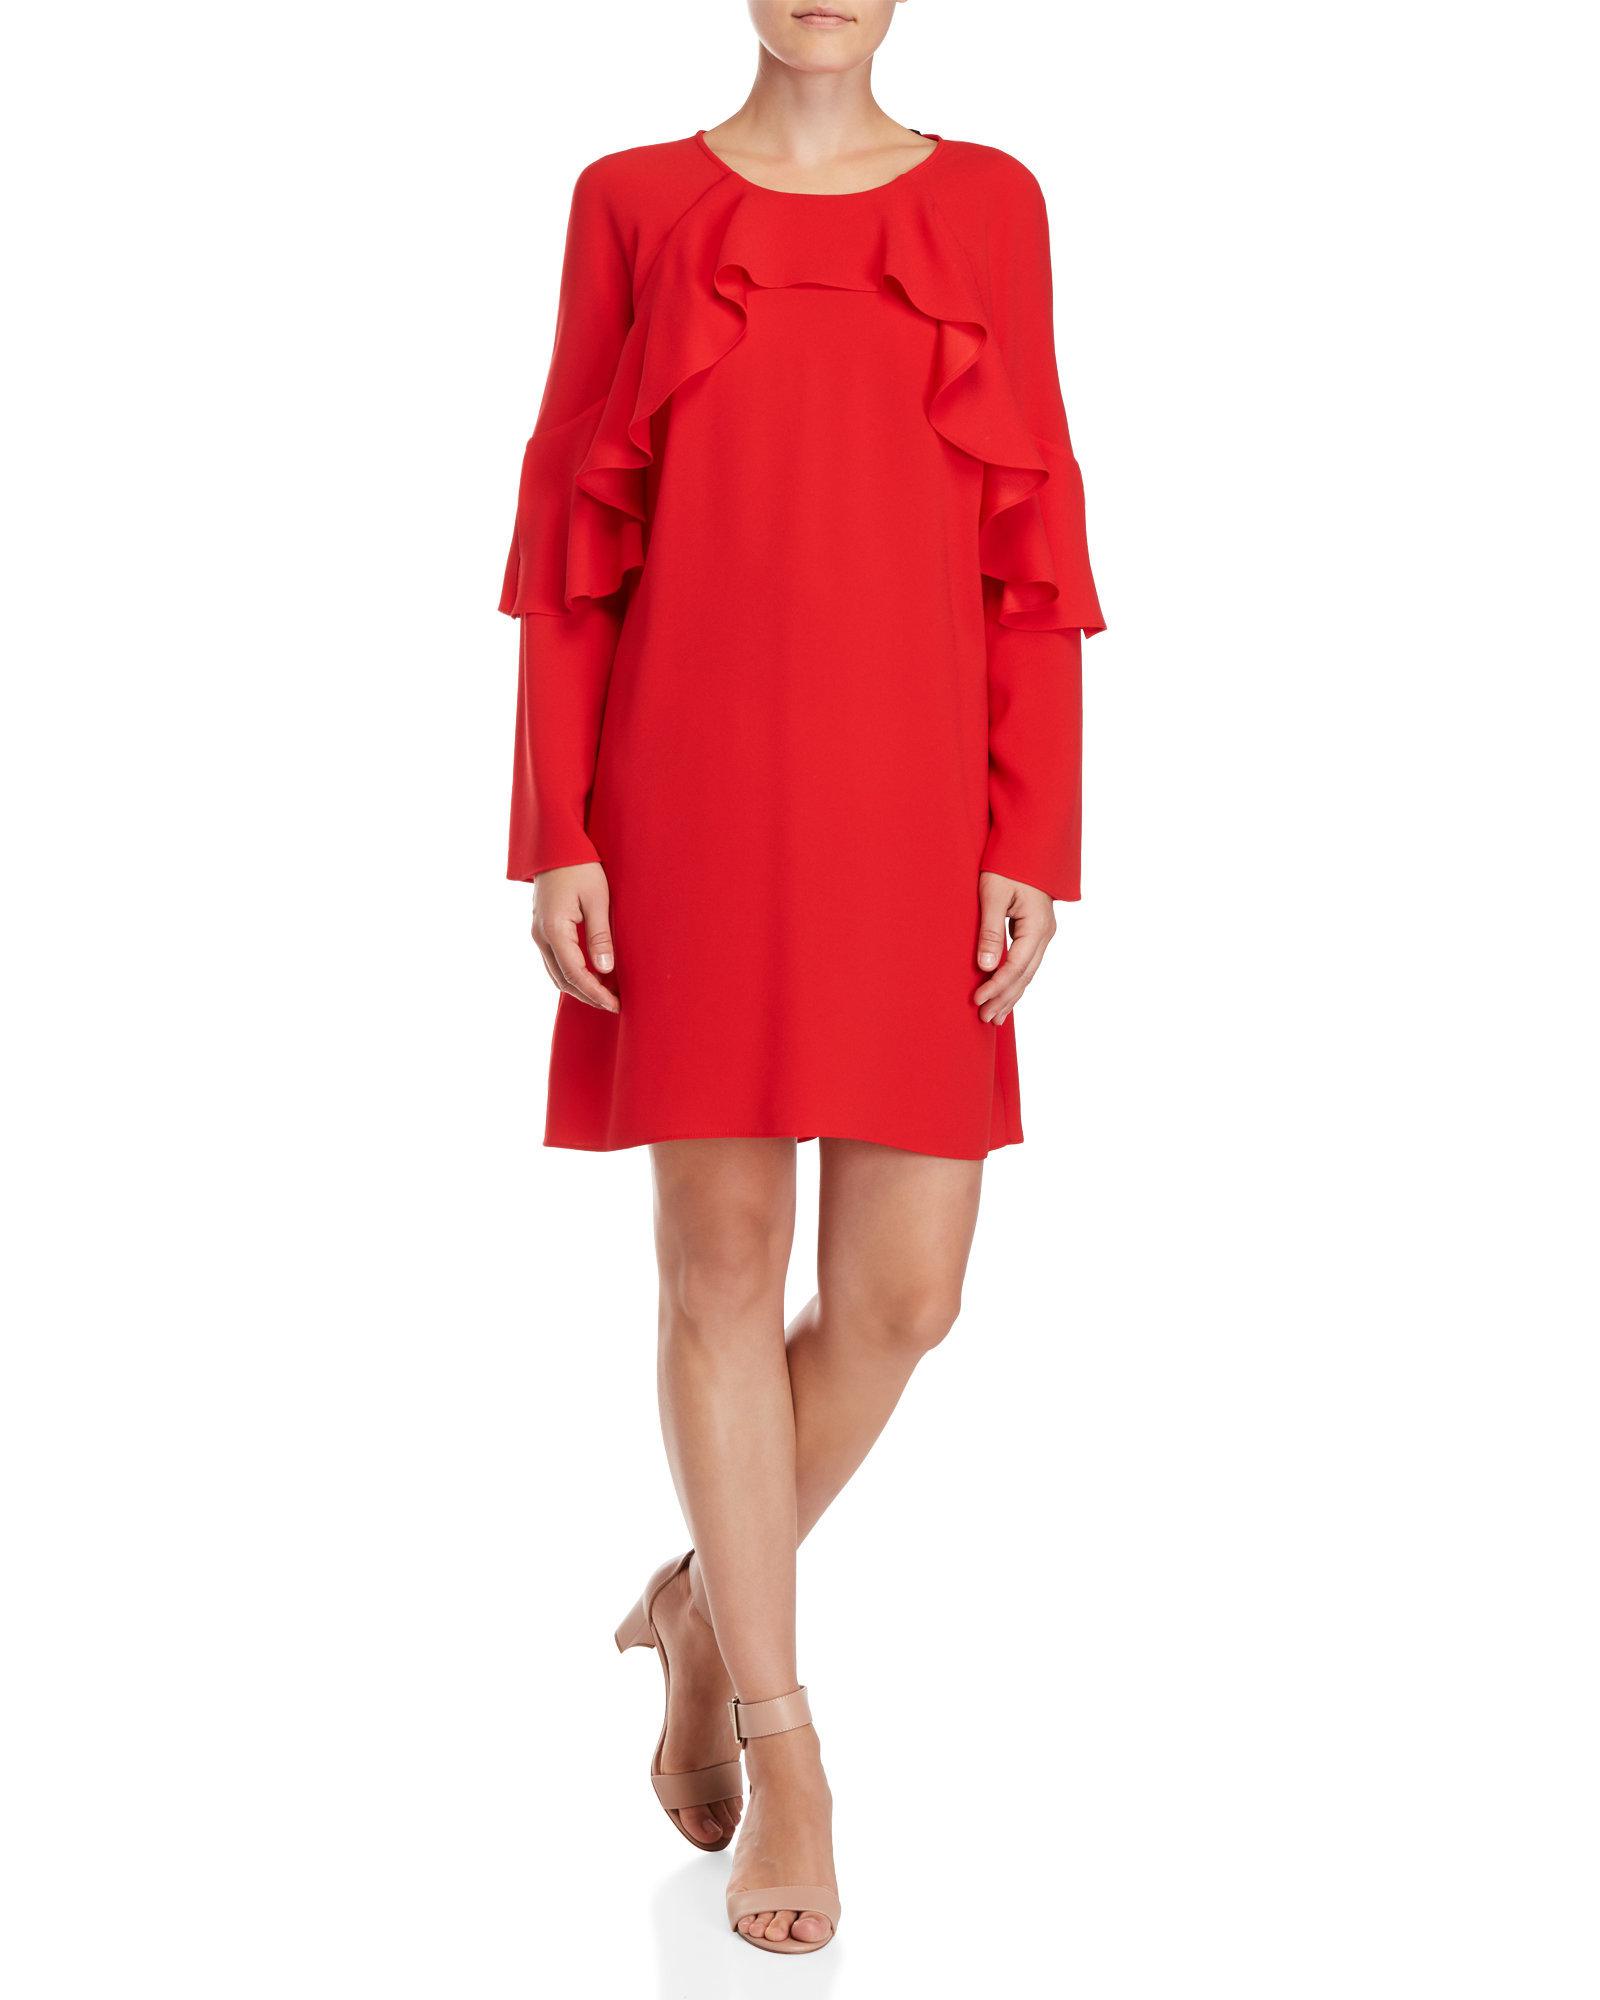 BCBGMAXAZRIA Synthetic Ruffled Long Sleeve Shift Dress in Red - Lyst